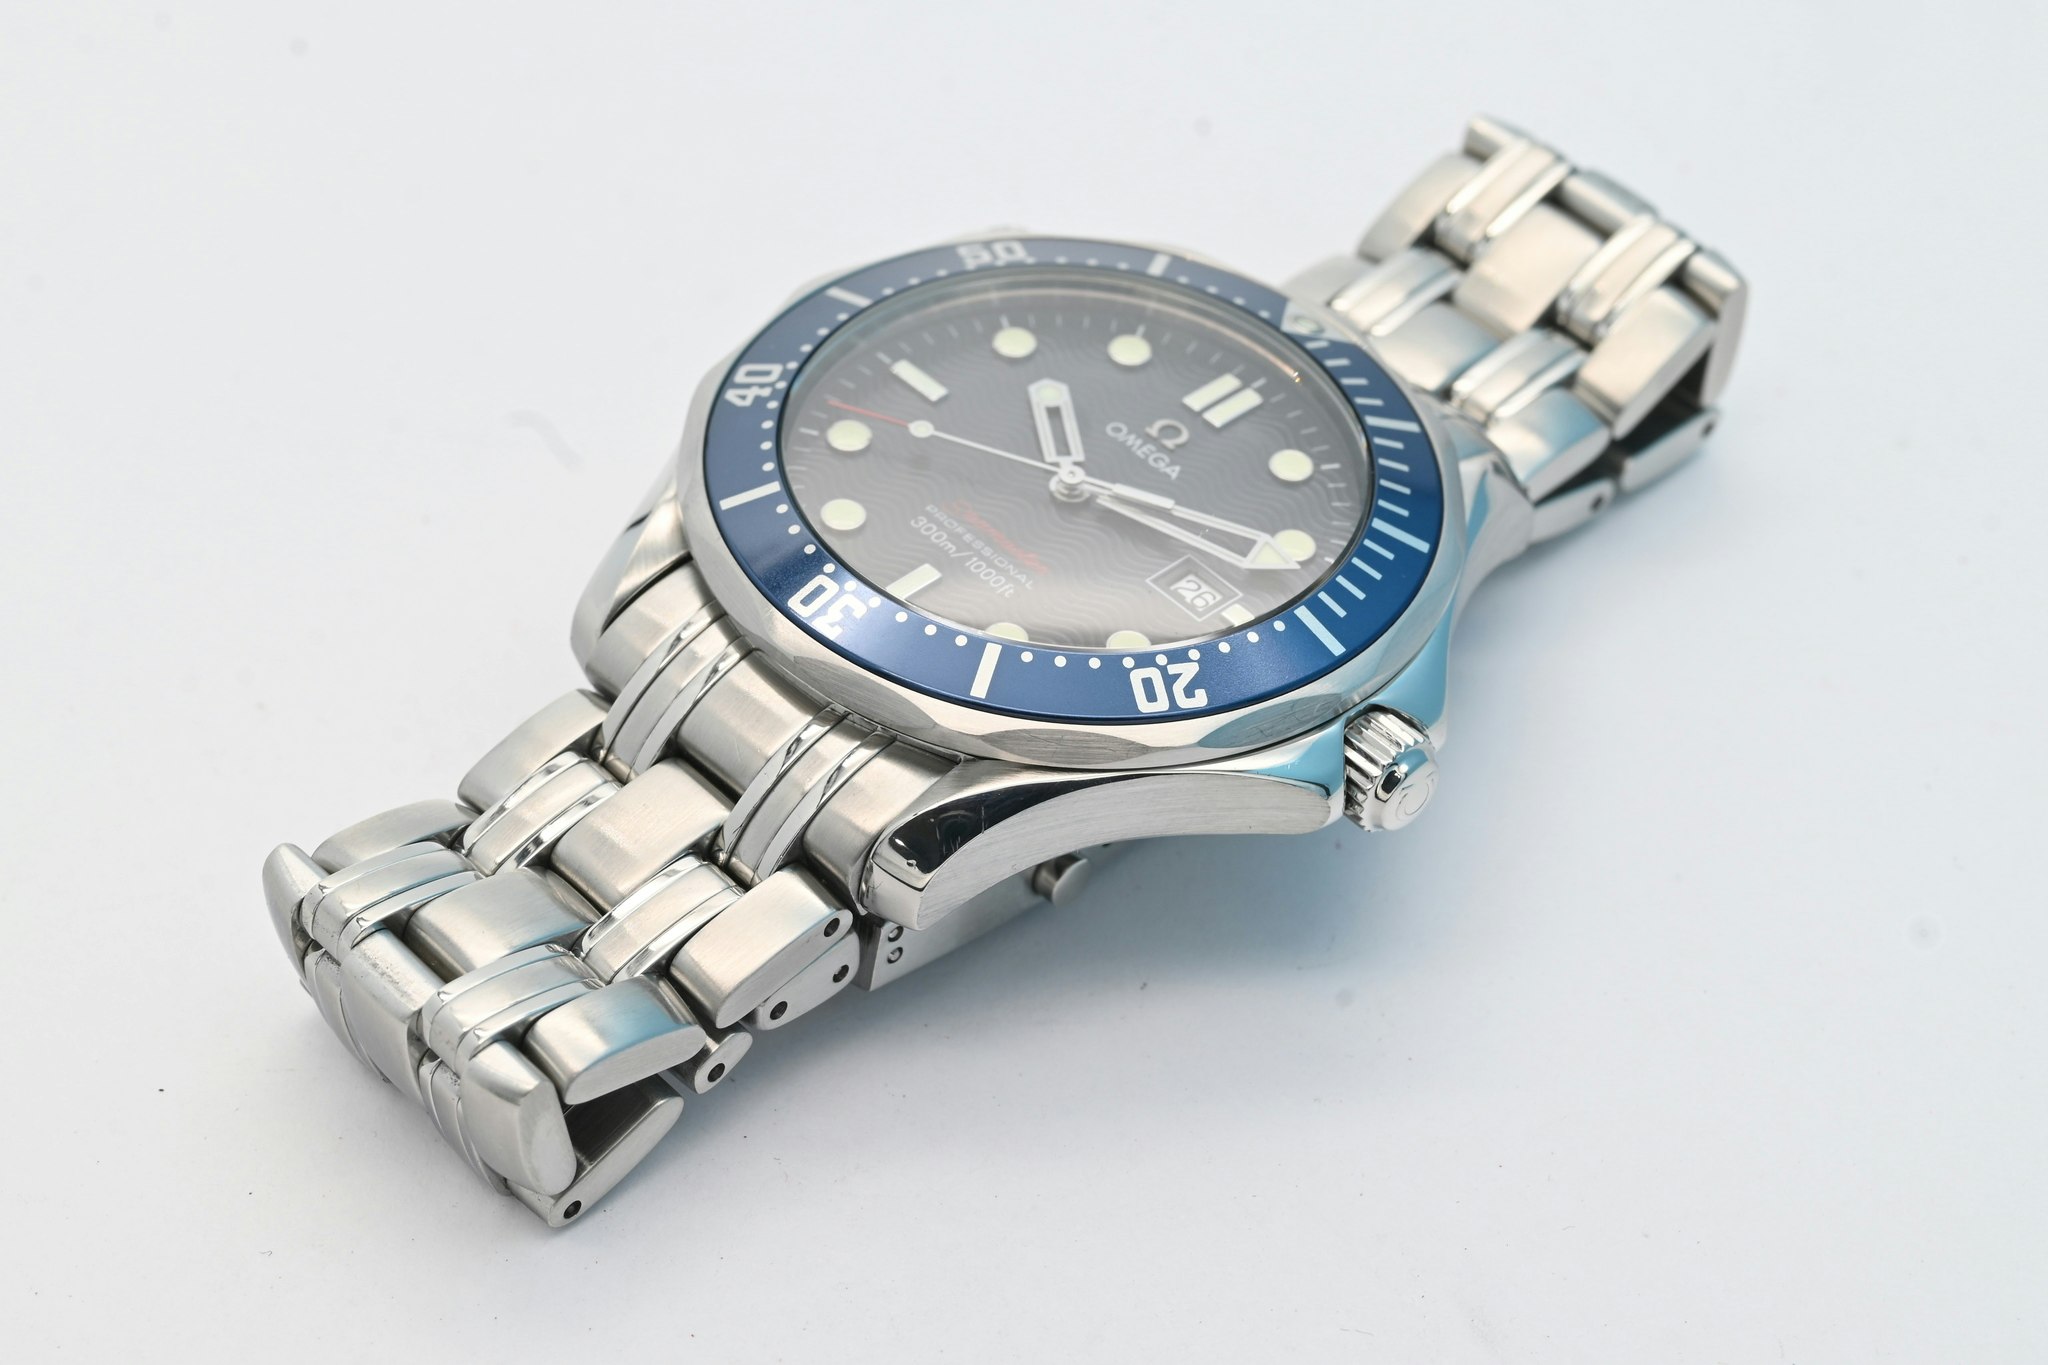 SOLD Omega Seamaster Diver 300 M ref: 2221.80 - Top Condition - 706